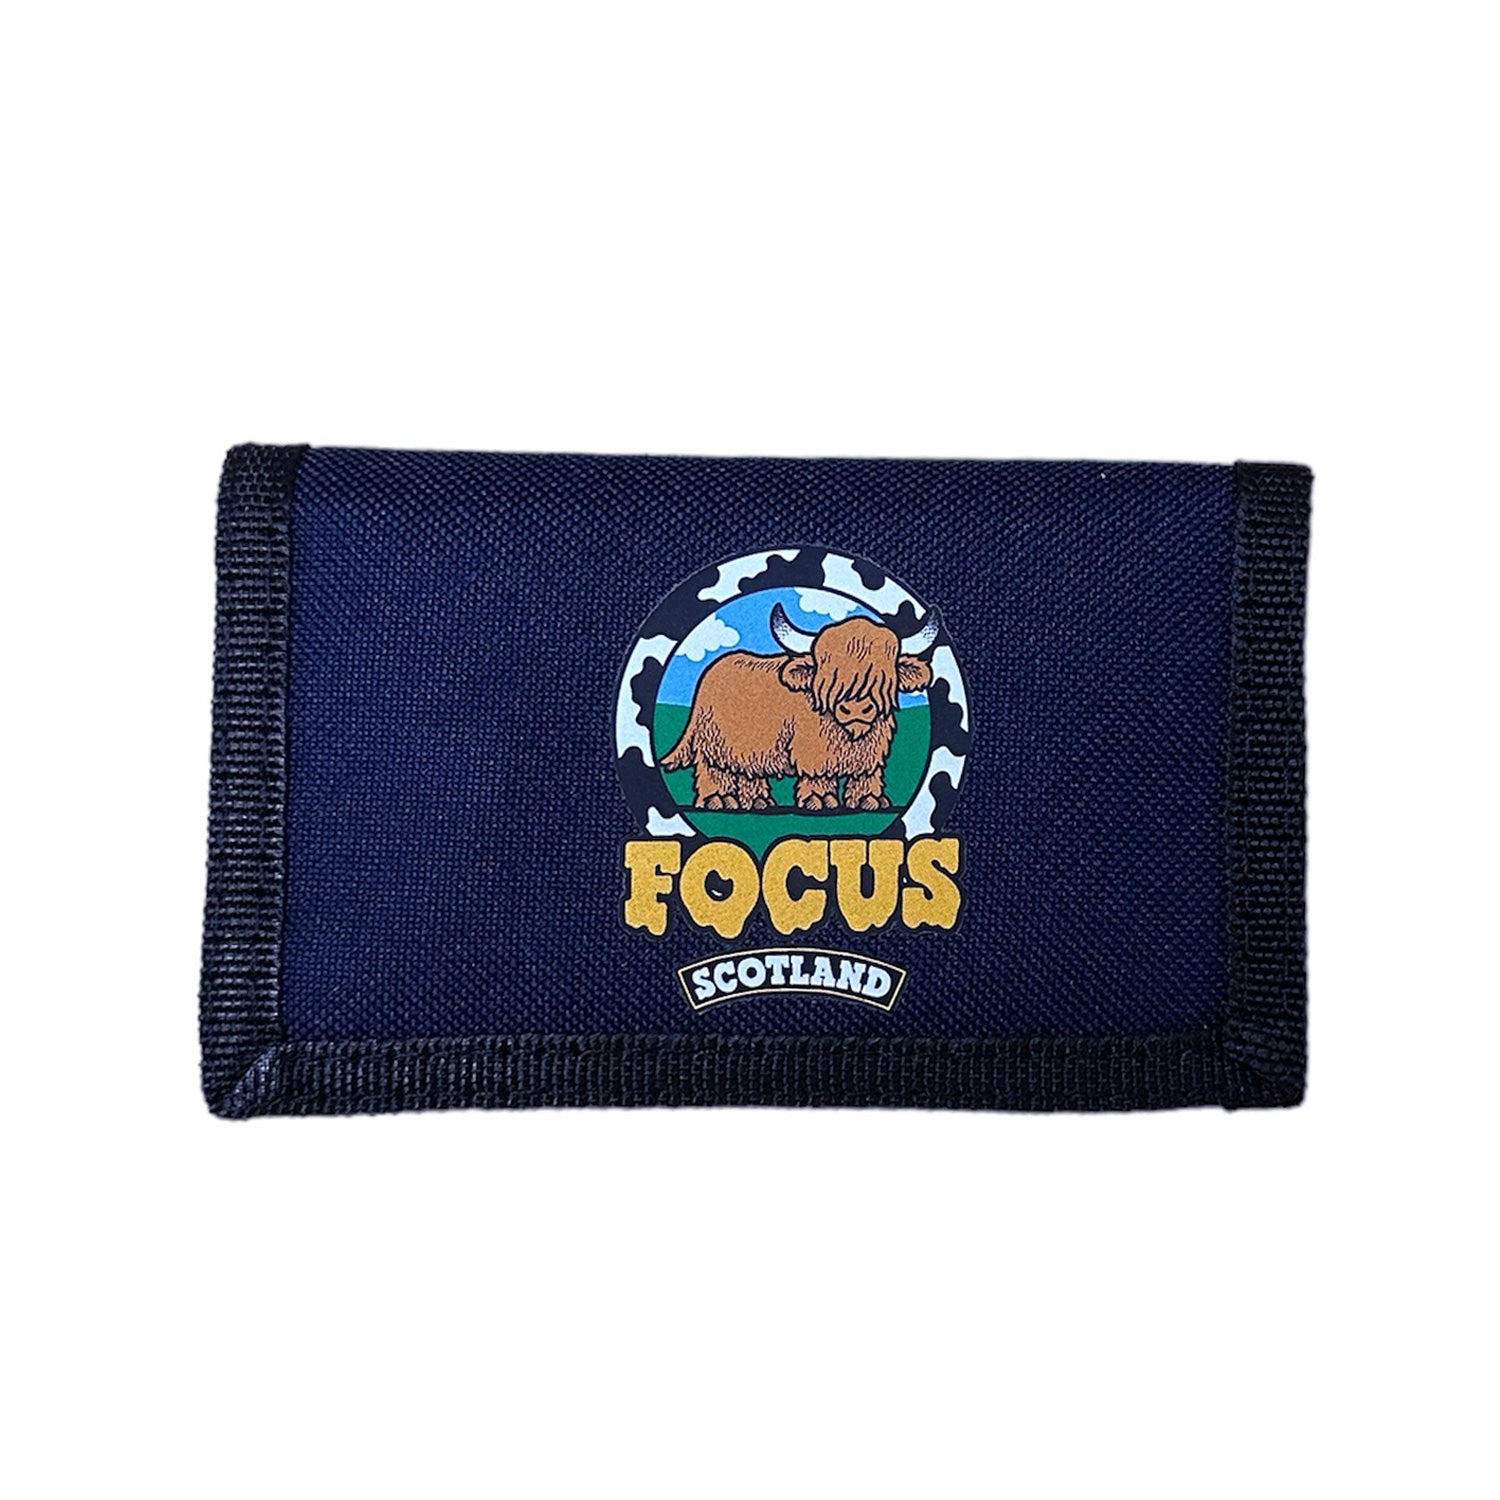 Navy blue focus wallet with yellow focus melted coo logo on front. Free uk shipping over £50